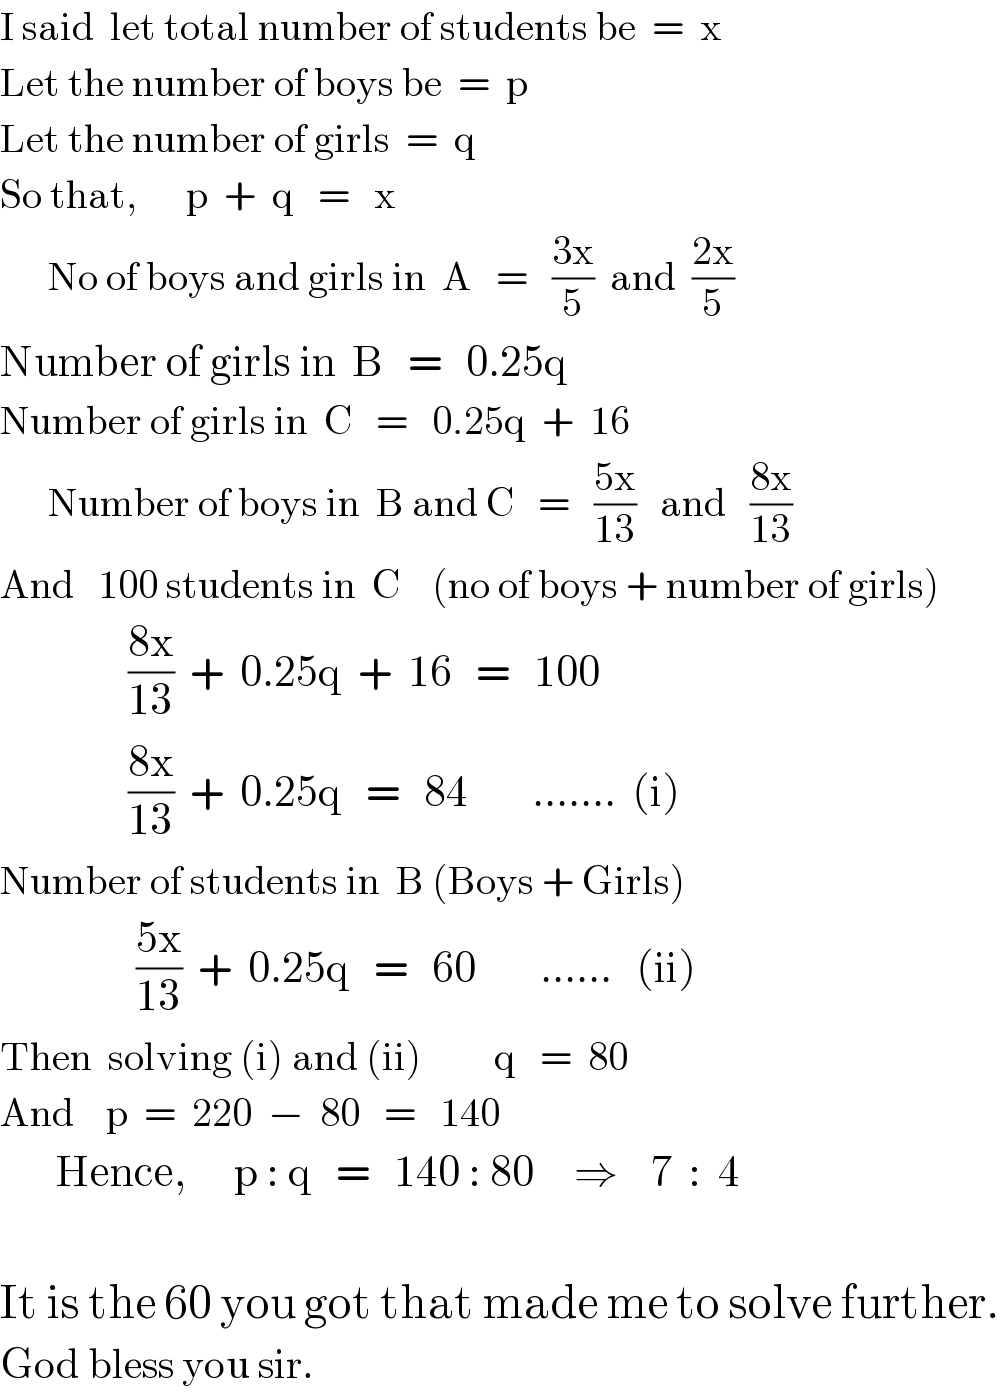 I said  let total number of students be  =  x  Let the number of boys be  =  p  Let the number of girls  =  q  So that,      p  +  q   =   x        No of boys and girls in  A   =   ((3x)/5)  and  ((2x)/5)  Number of girls in  B   =   0.25q  Number of girls in  C   =   0.25q  +  16        Number of boys in  B and C   =   ((5x)/(13))   and   ((8x)/(13))  And   100 students in  C    (no of boys + number of girls)                  ((8x)/(13))  +  0.25q  +  16   =   100                         ((8x)/(13))  +  0.25q   =   84        .......  (i)  Number of students in  B (Boys + Girls)                   ((5x)/(13))  +  0.25q   =   60        ......   (ii)  Then  solving (i) and (ii)         q   =  80  And    p  =  220  −  80   =   140         Hence,      p : q   =   140 : 80     ⇒    7  :  4    It is the 60 you got that made me to solve further.  God bless you sir.  